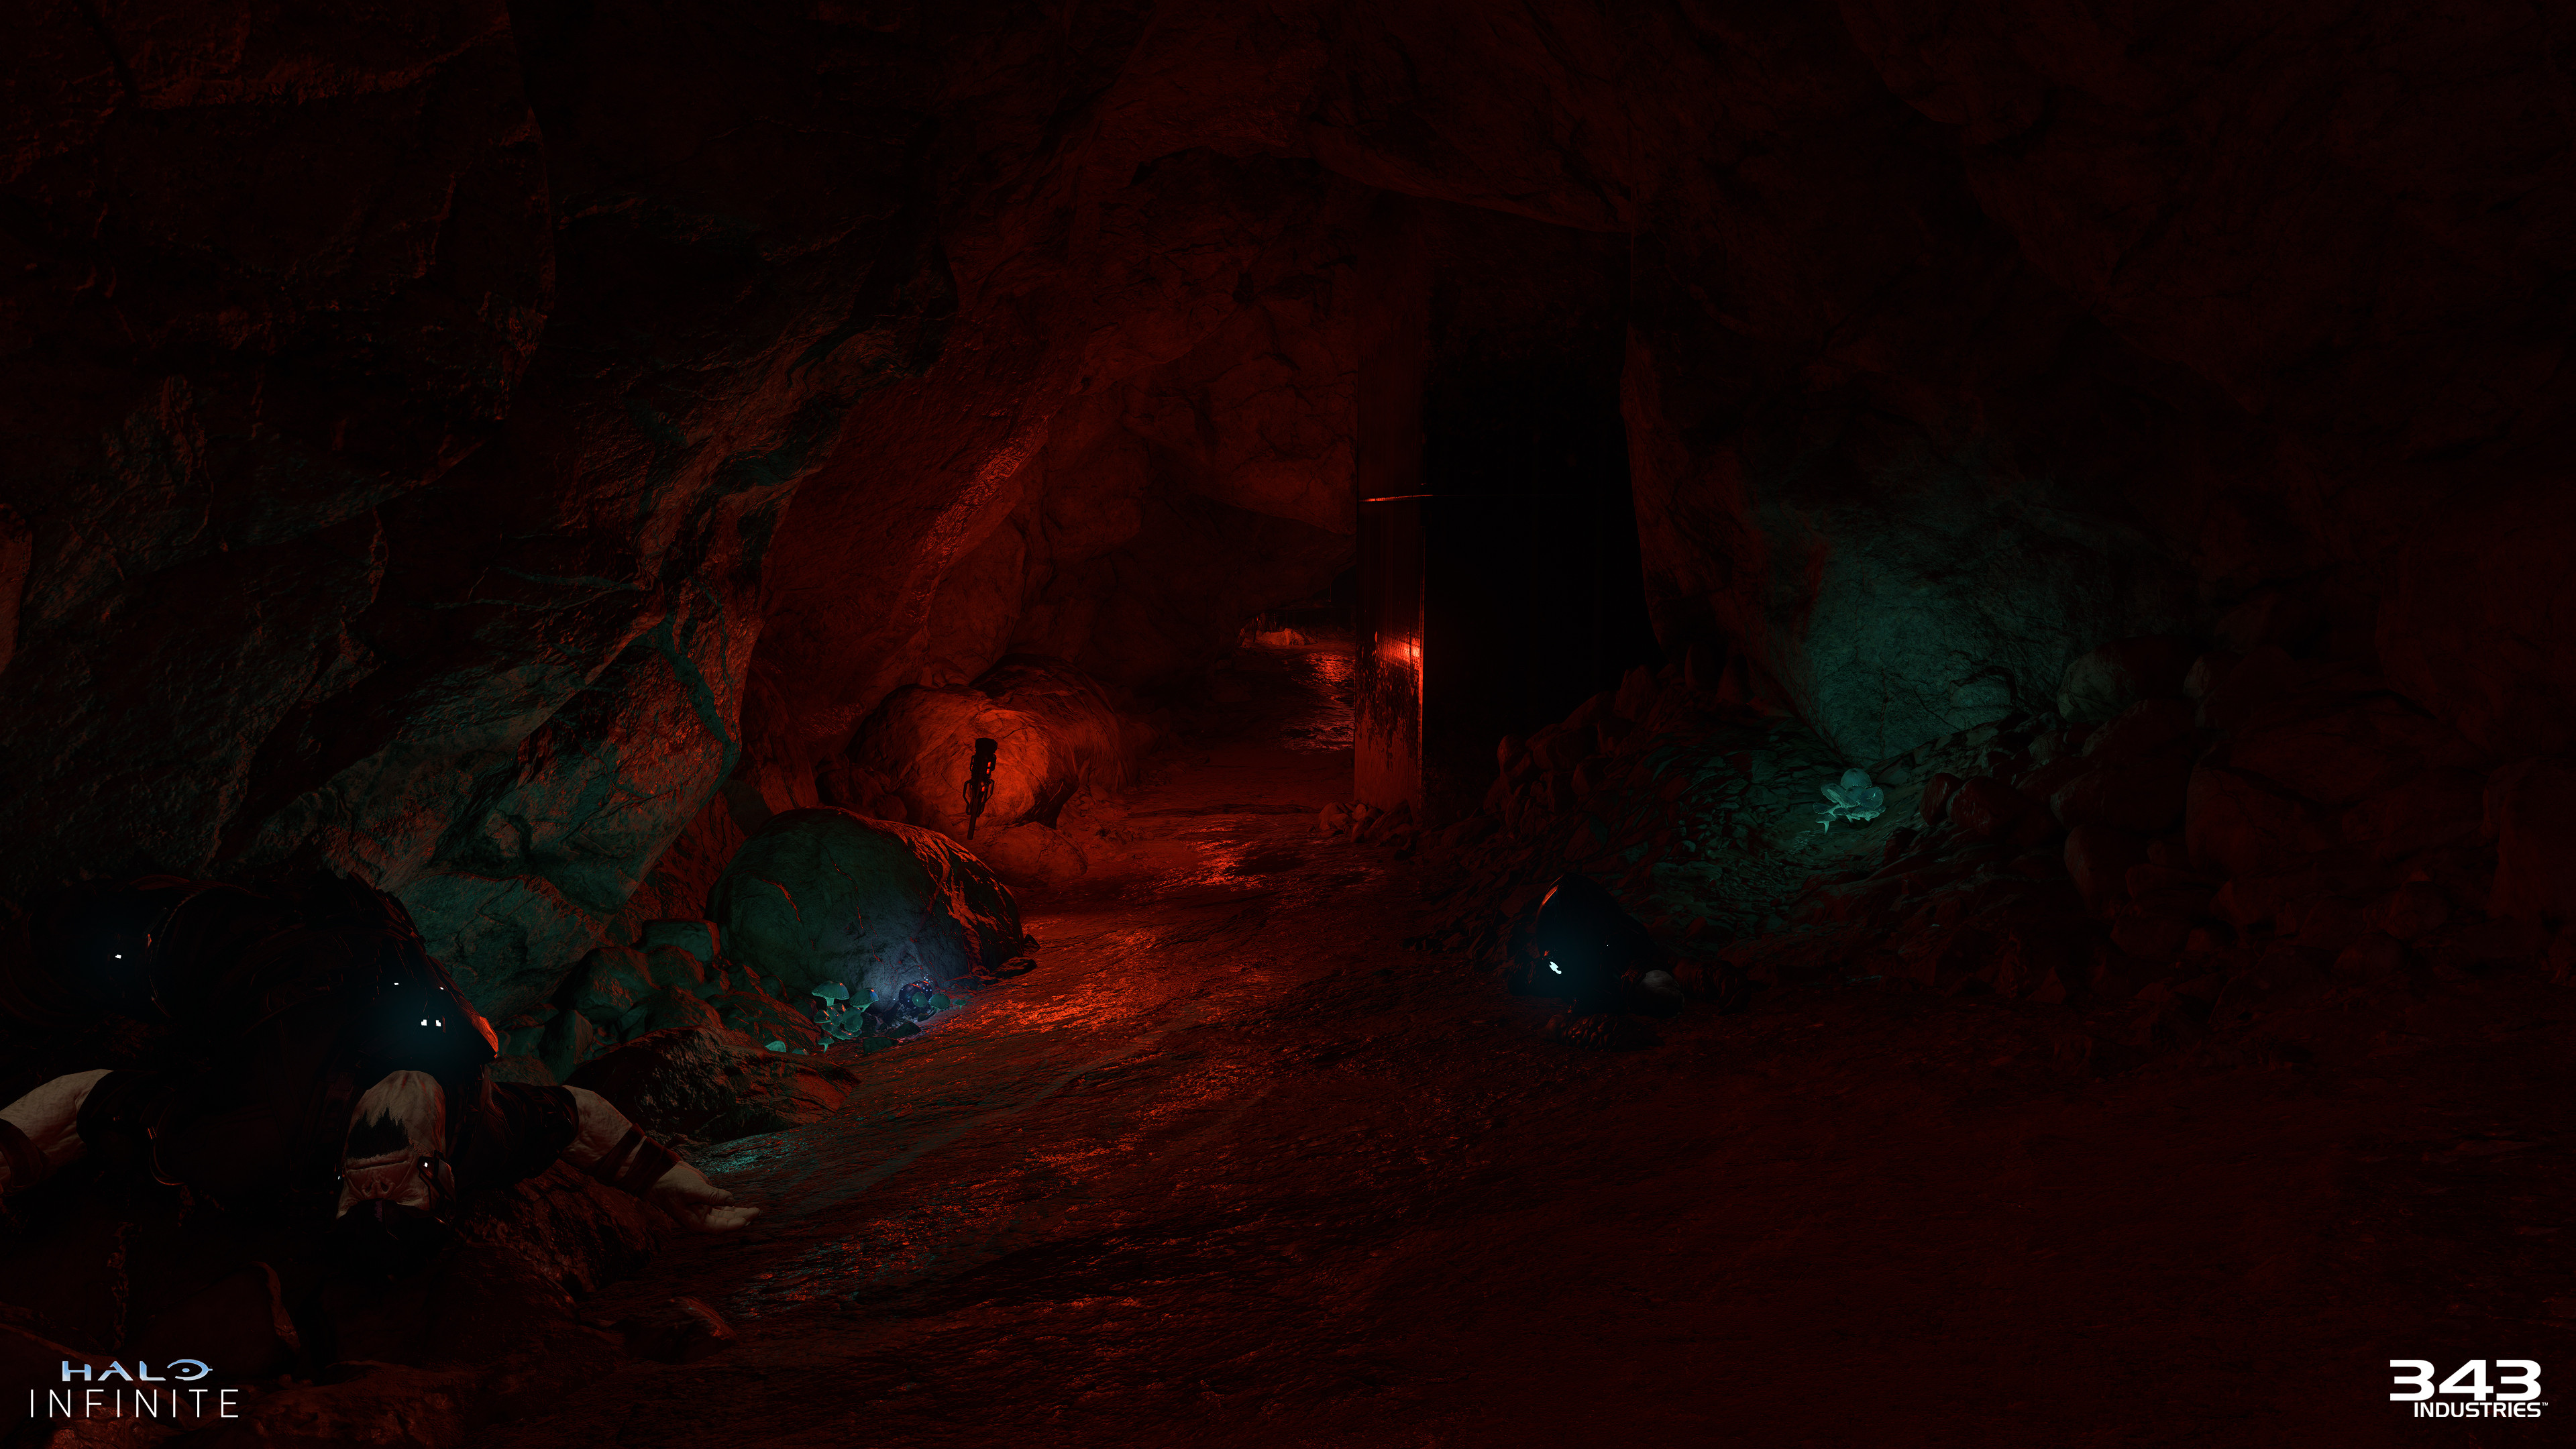 Additional lighting artists did work within the caves as well.